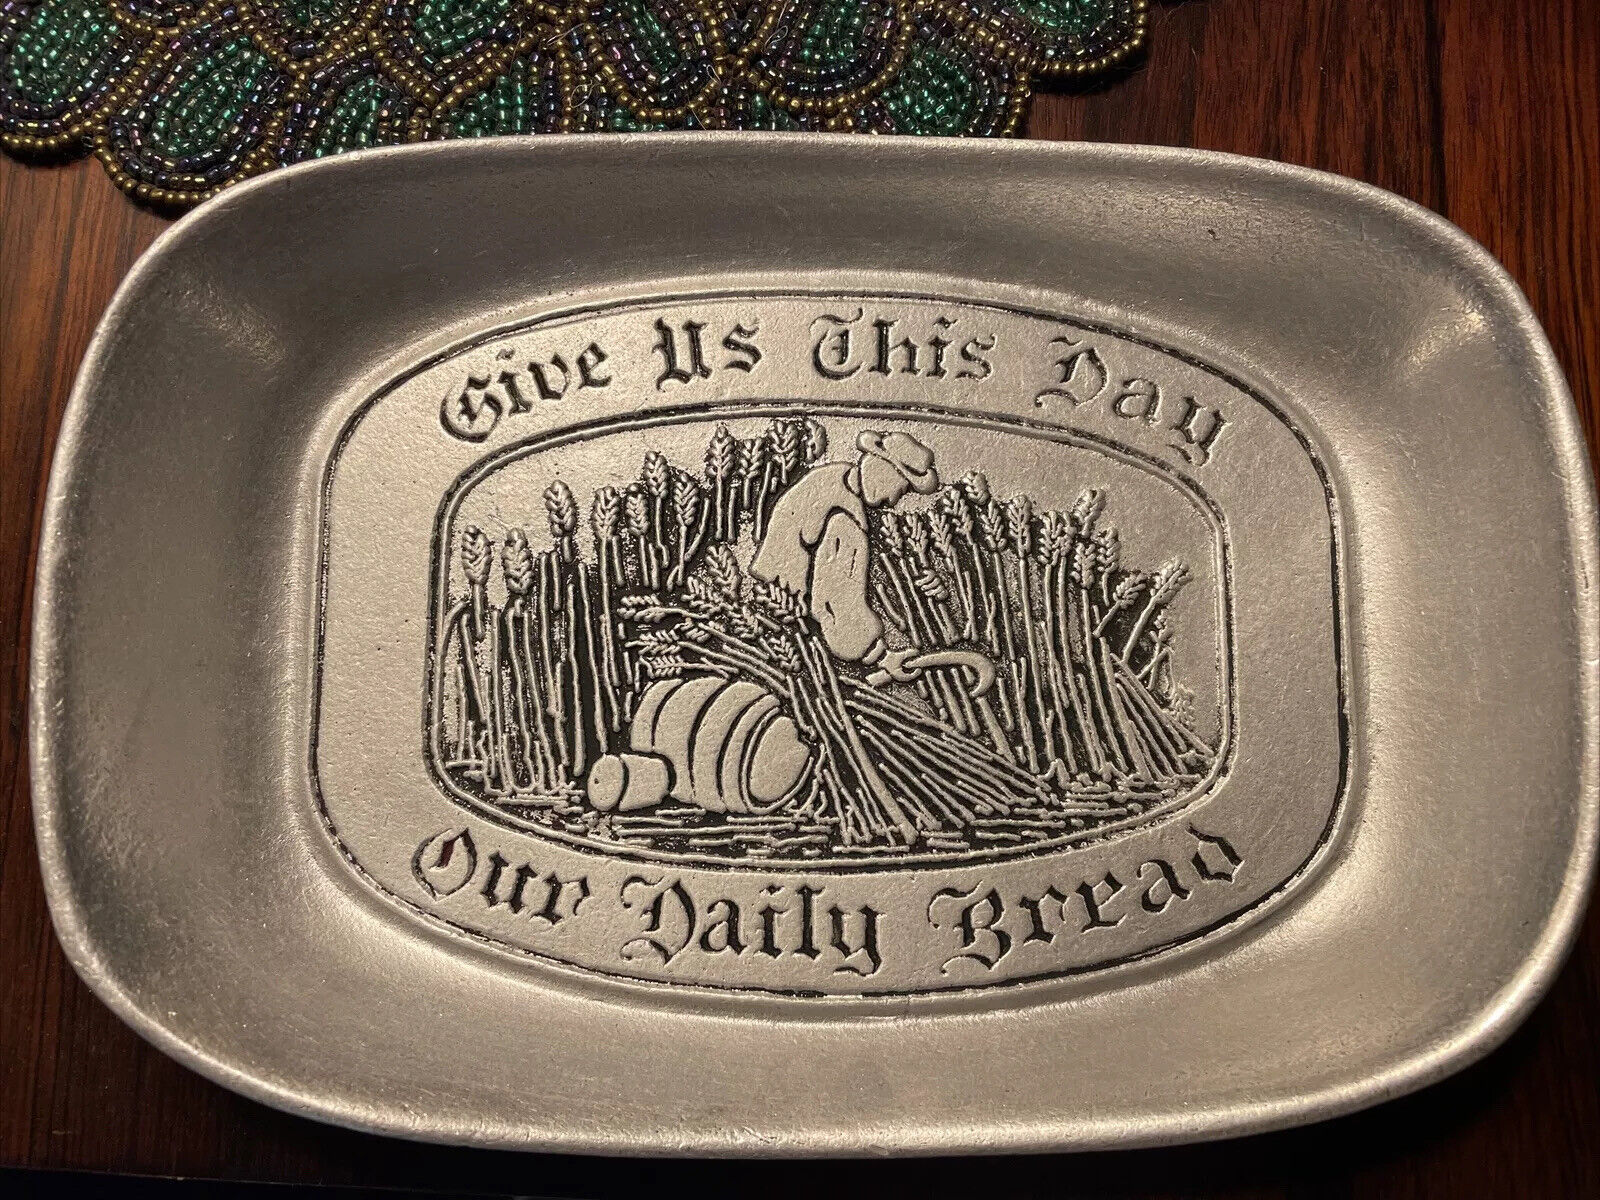 Primary image for Wilton Armetale RWP Pewter Bread Tray Platter - Give Us This Day Our Daily Bread